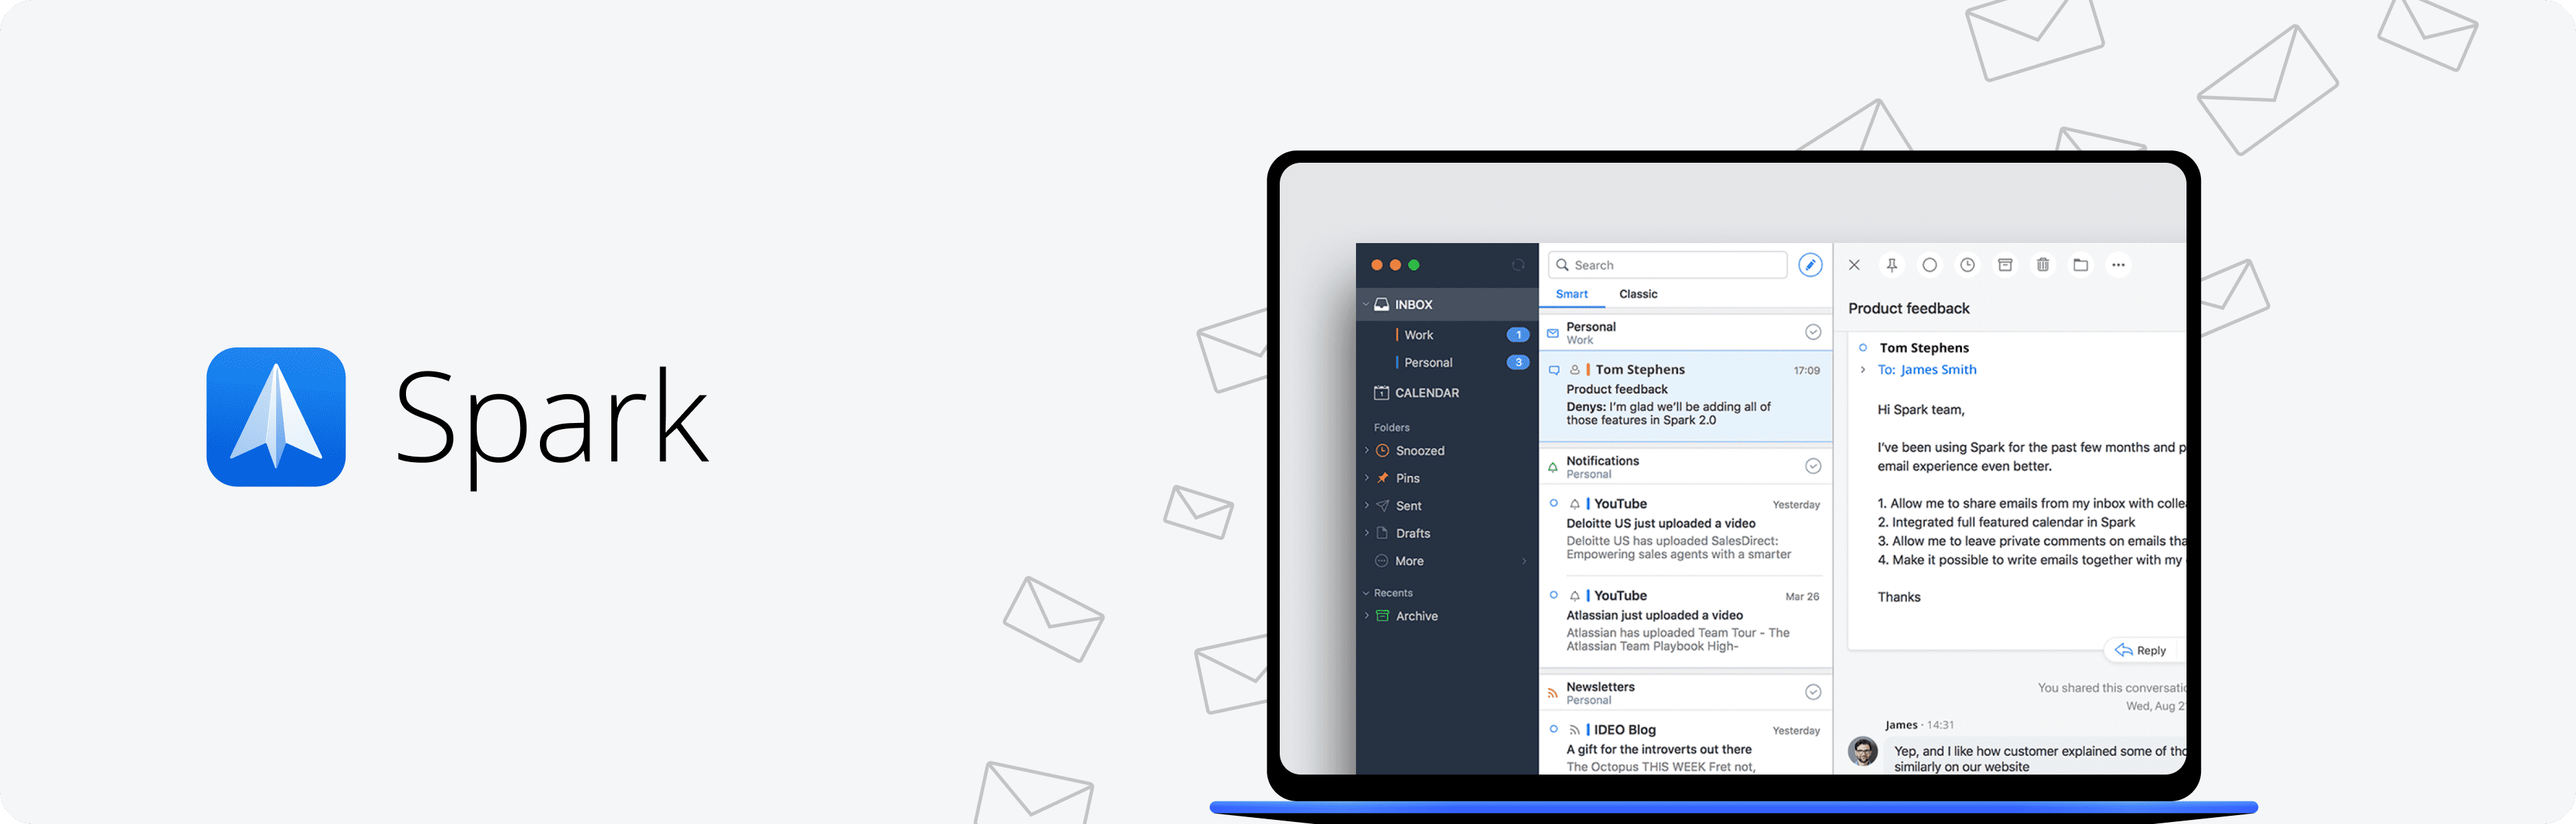 outlook contact management system for mac